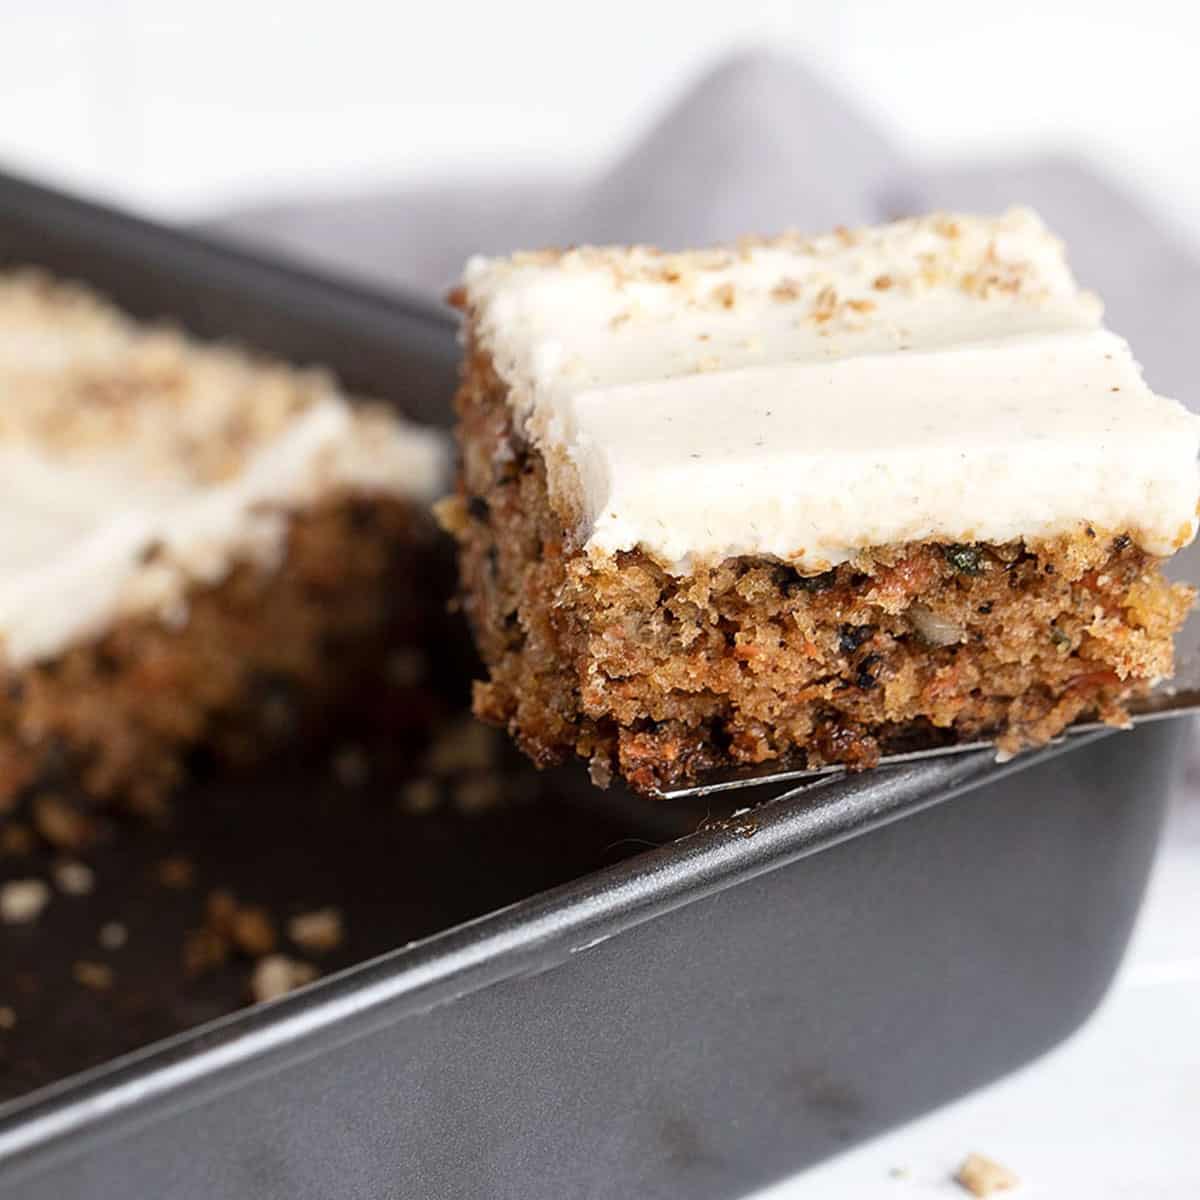 Super Moist Carrot Sheet Cake with Cream Cheese Frosting